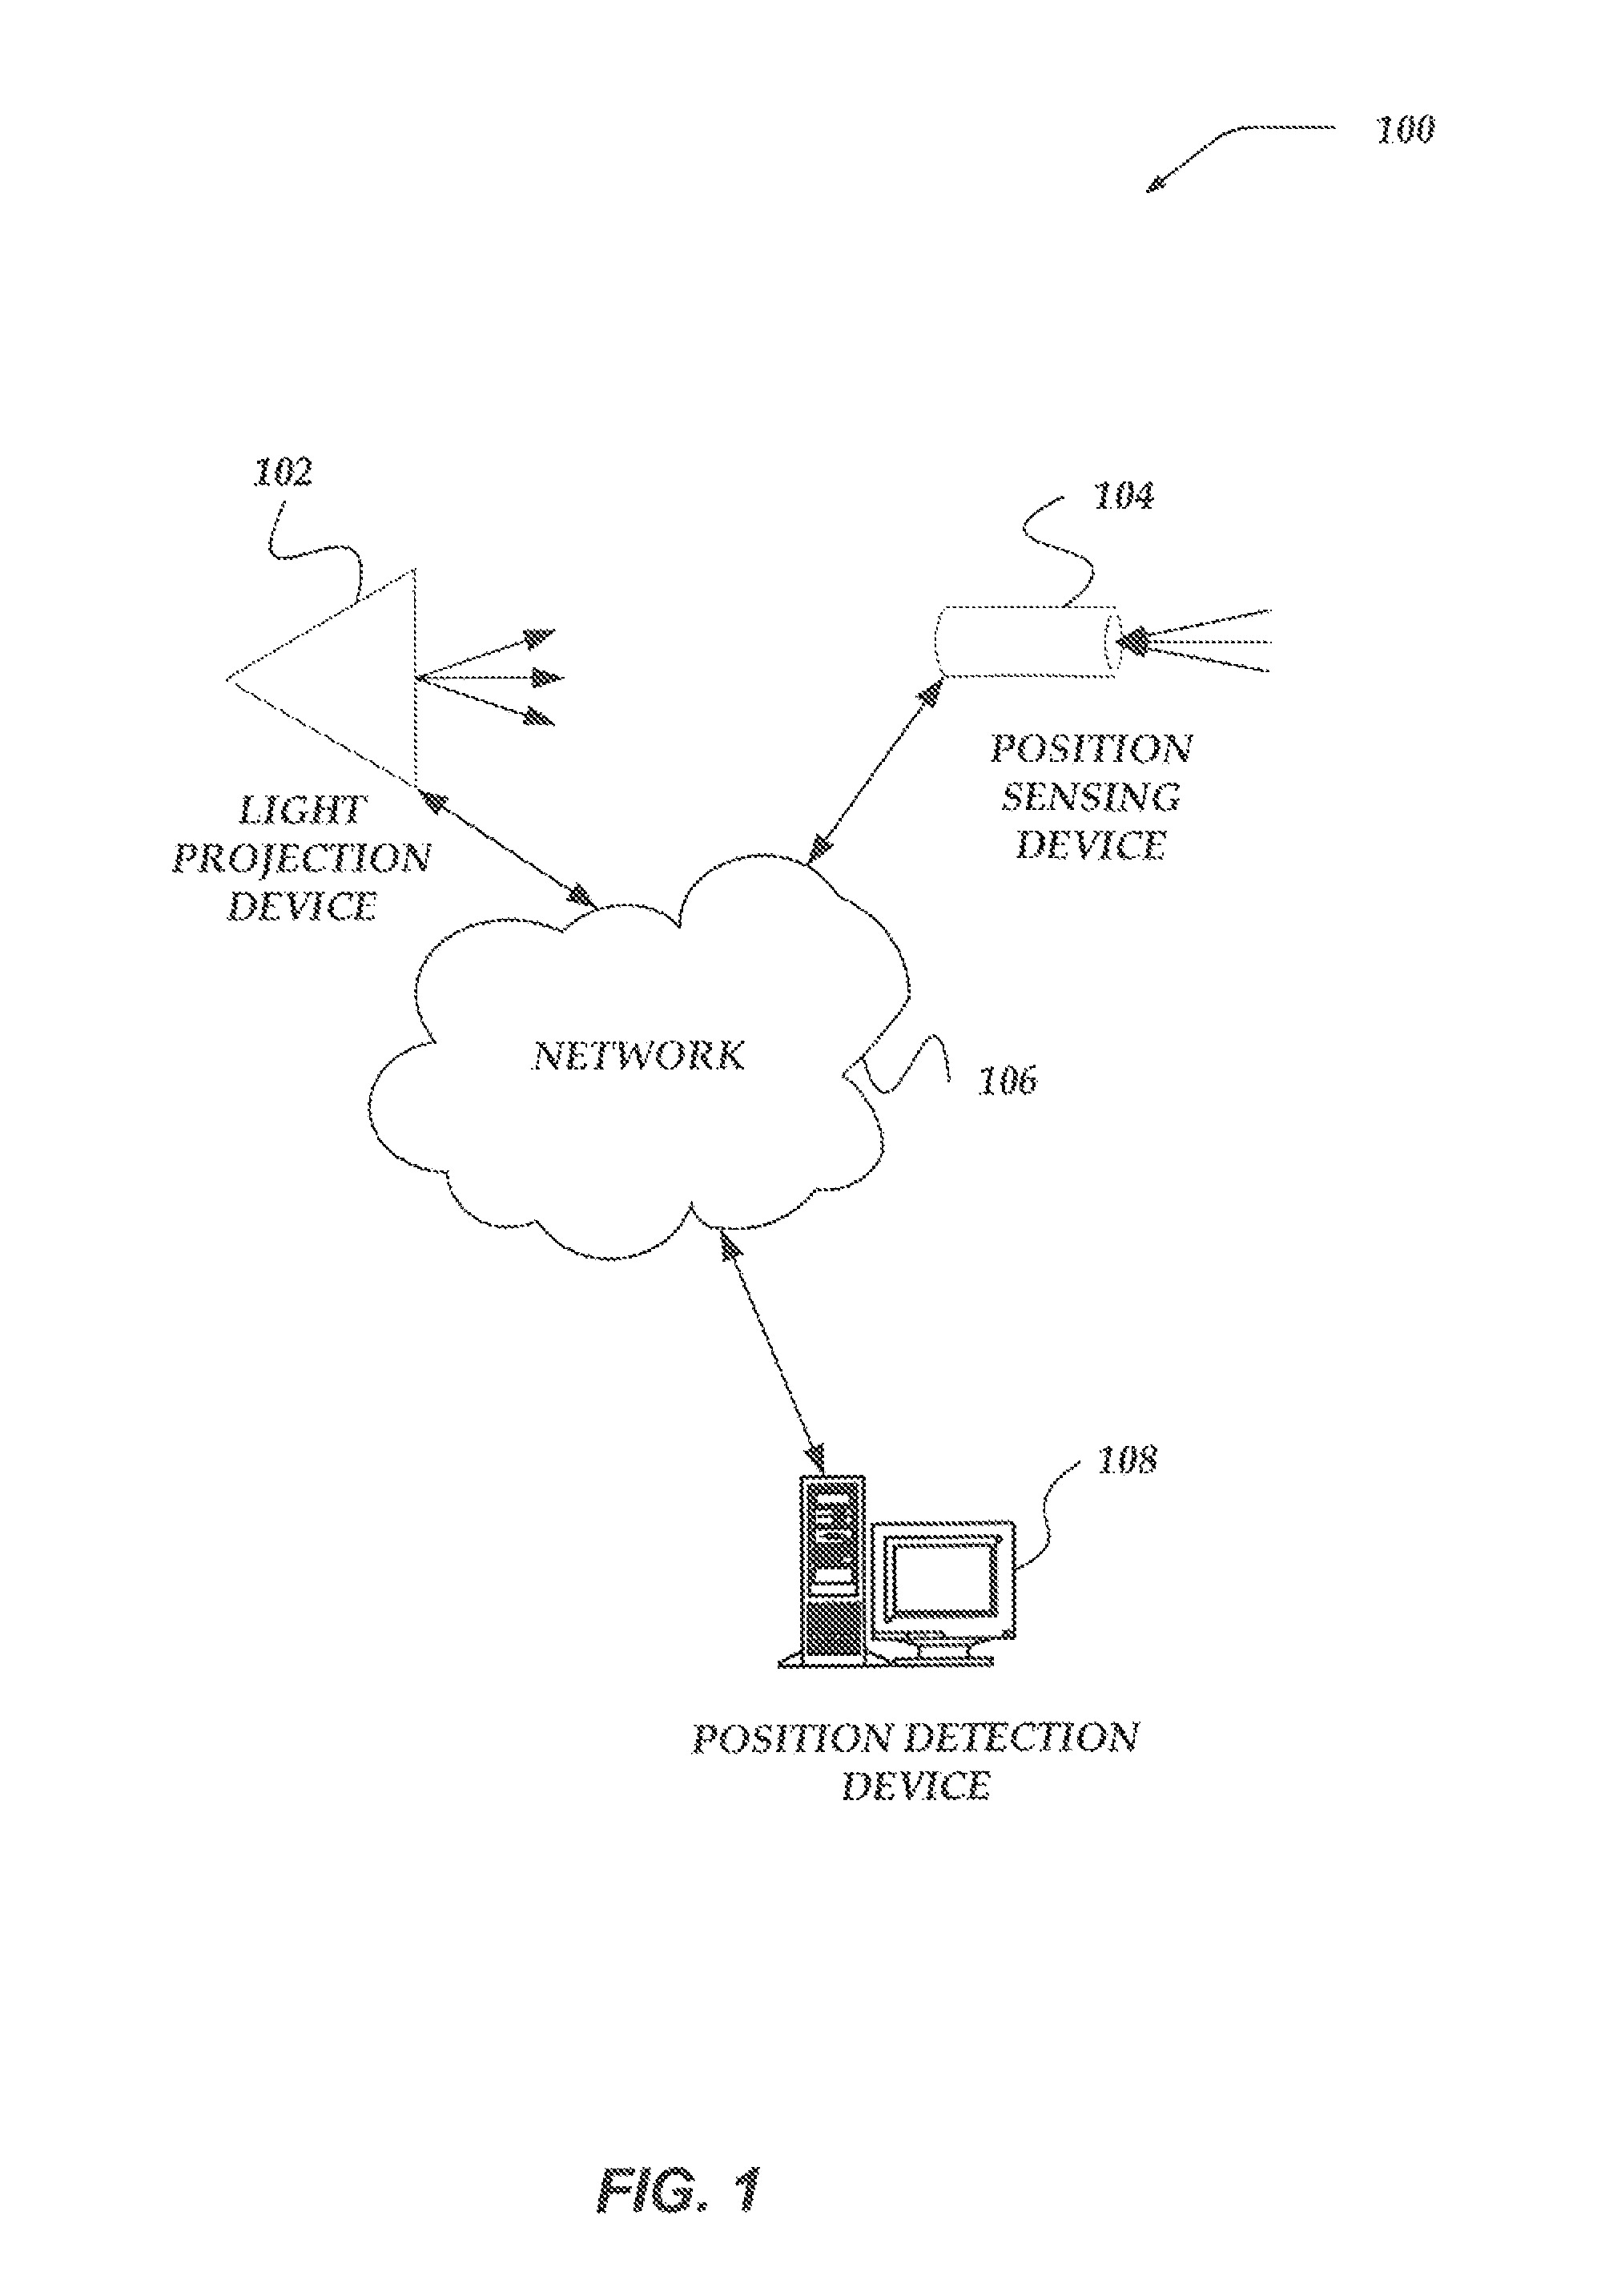 Scanning optical positioning system with spatially triangulating receivers